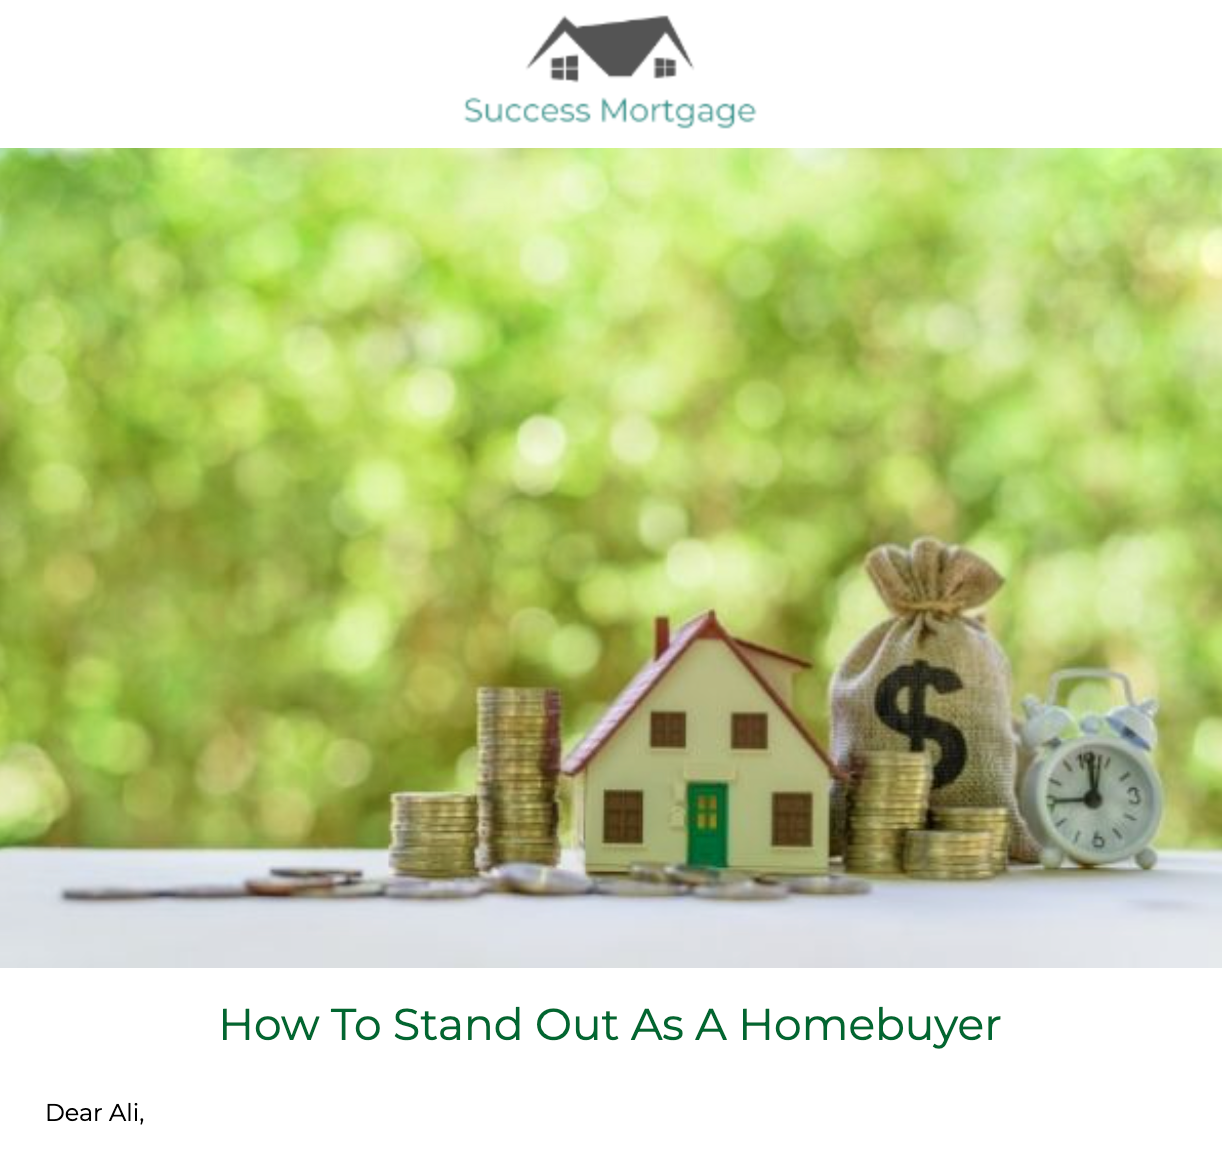 How To Stand Out As A Homebuyer